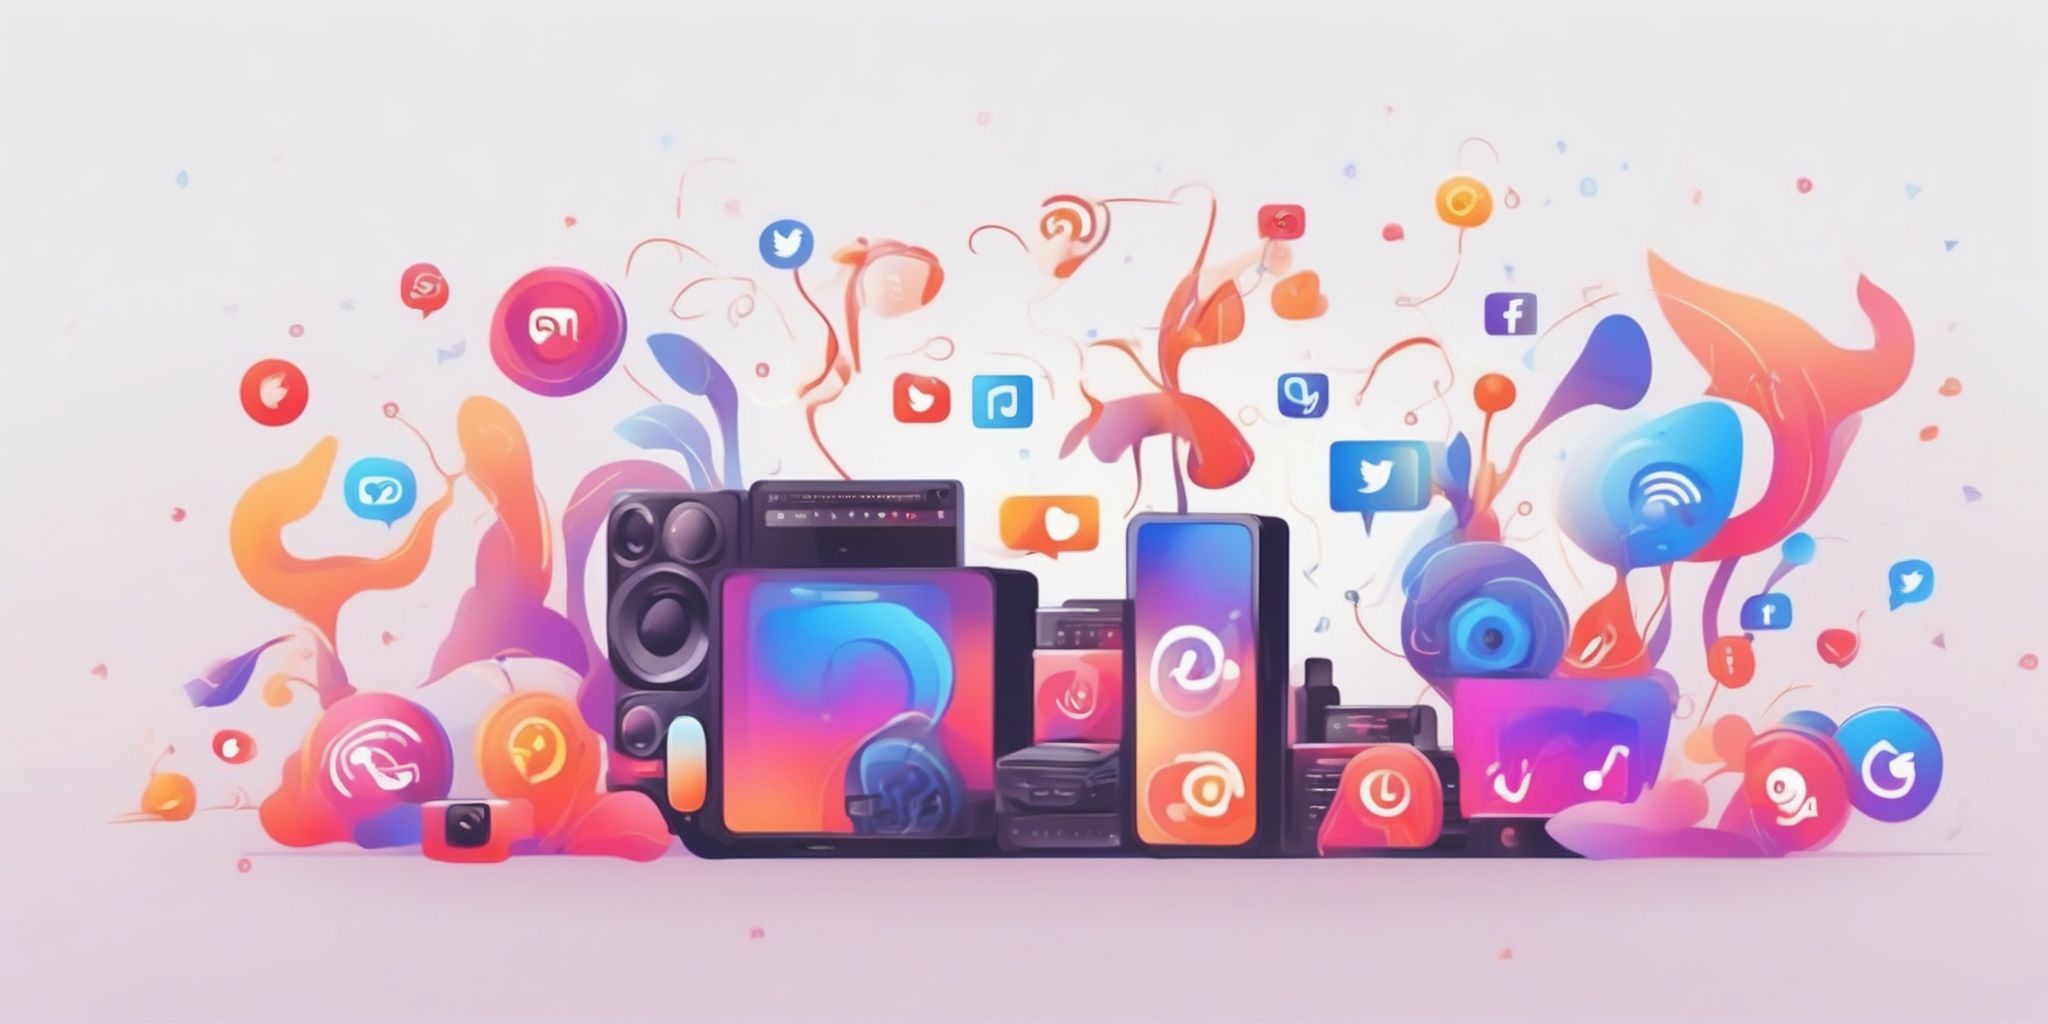 social media amplifier in illustration style with gradients and white background